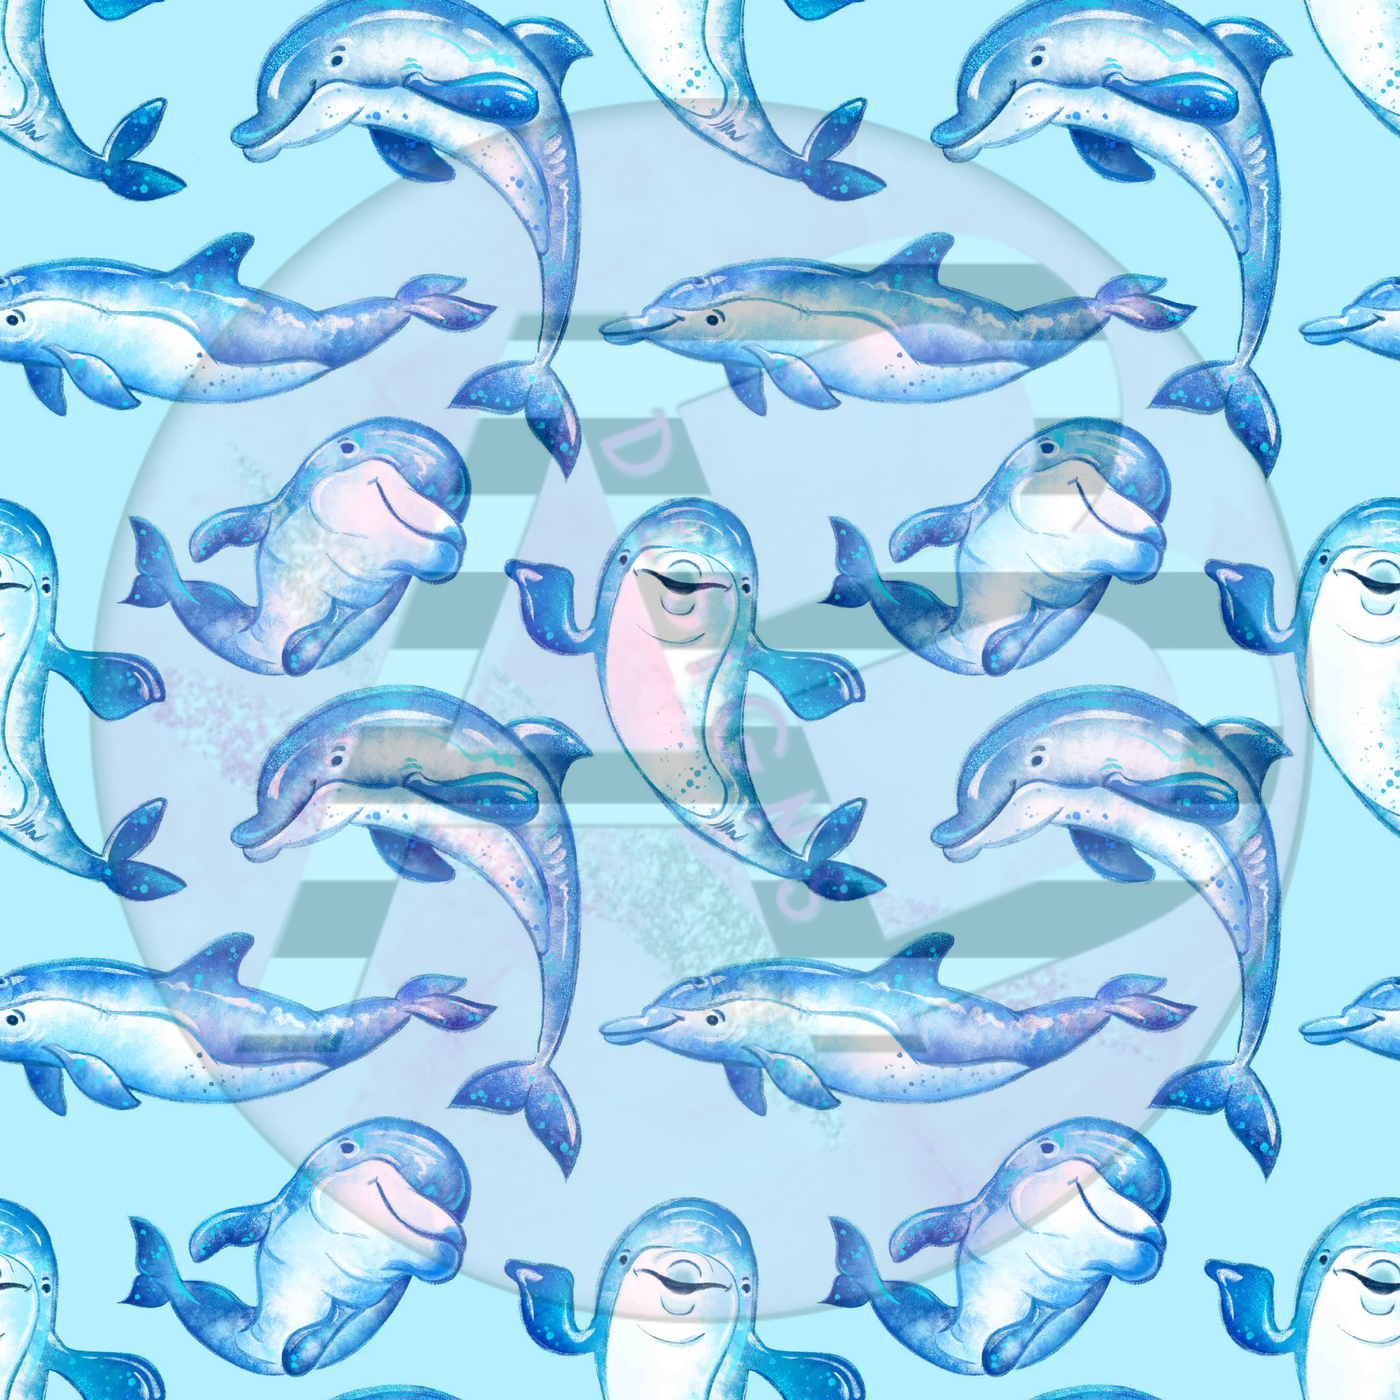 Adhesive Patterned Vinyl - Dolphin 02